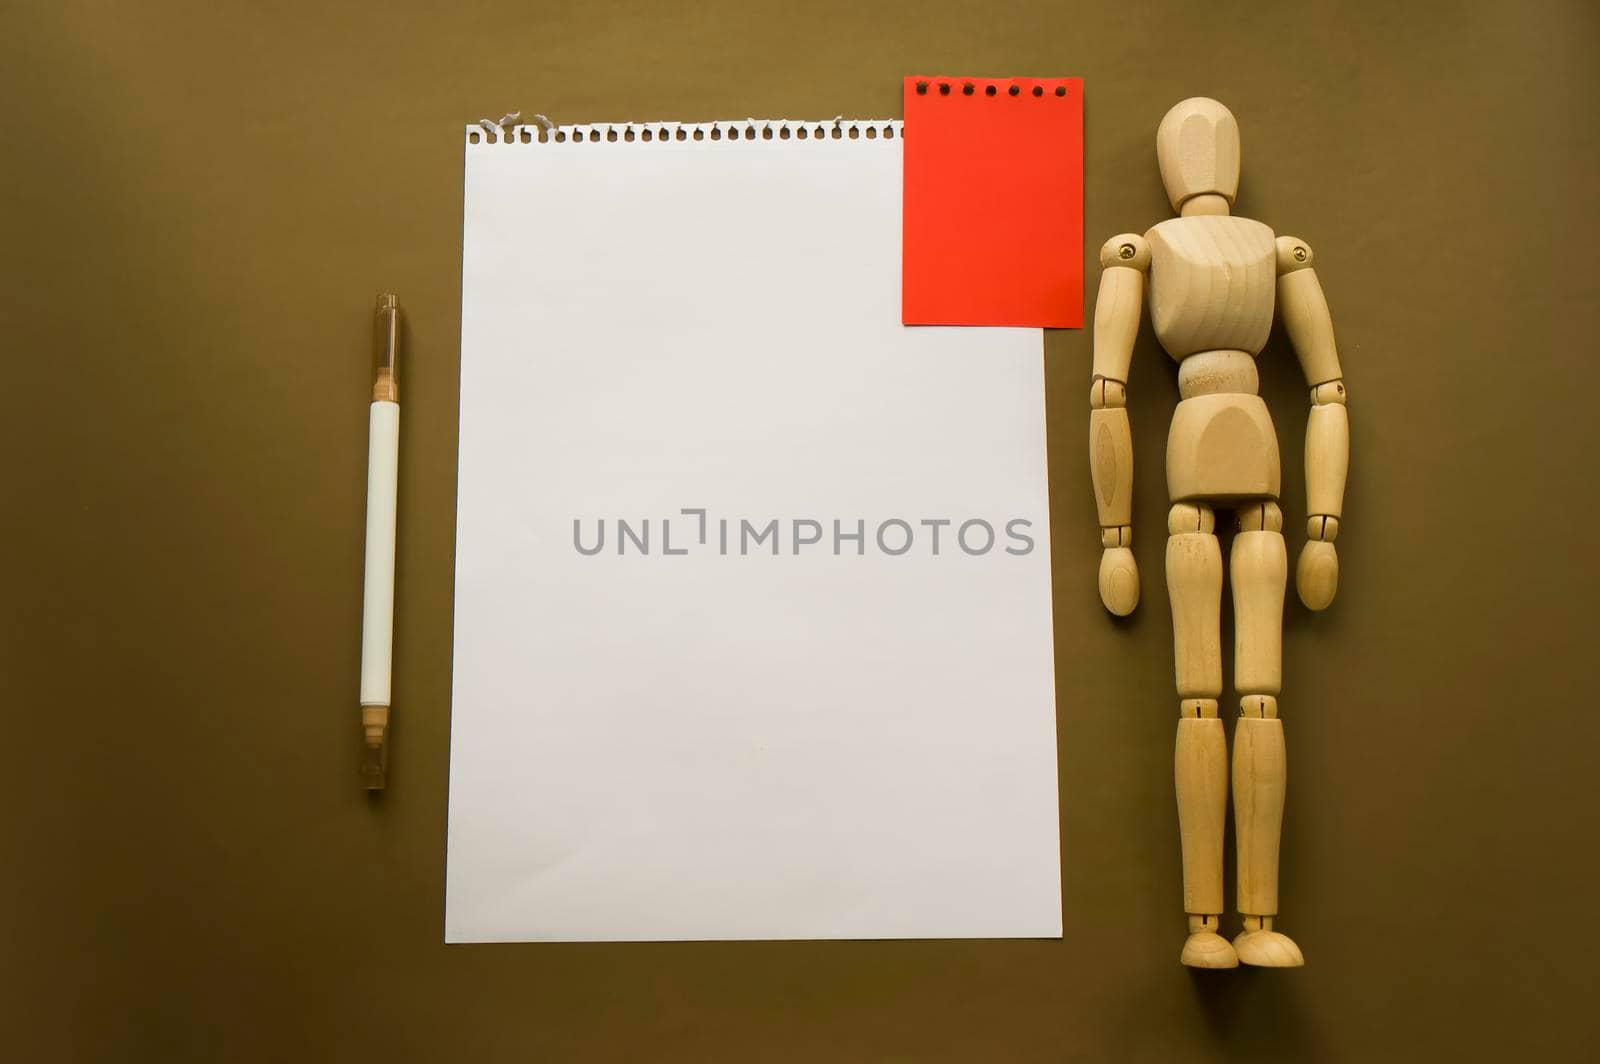 Wooden doll and a blank piece of paper. Wooden mannequin with sheets of paper concept, blank space. Creativity and art